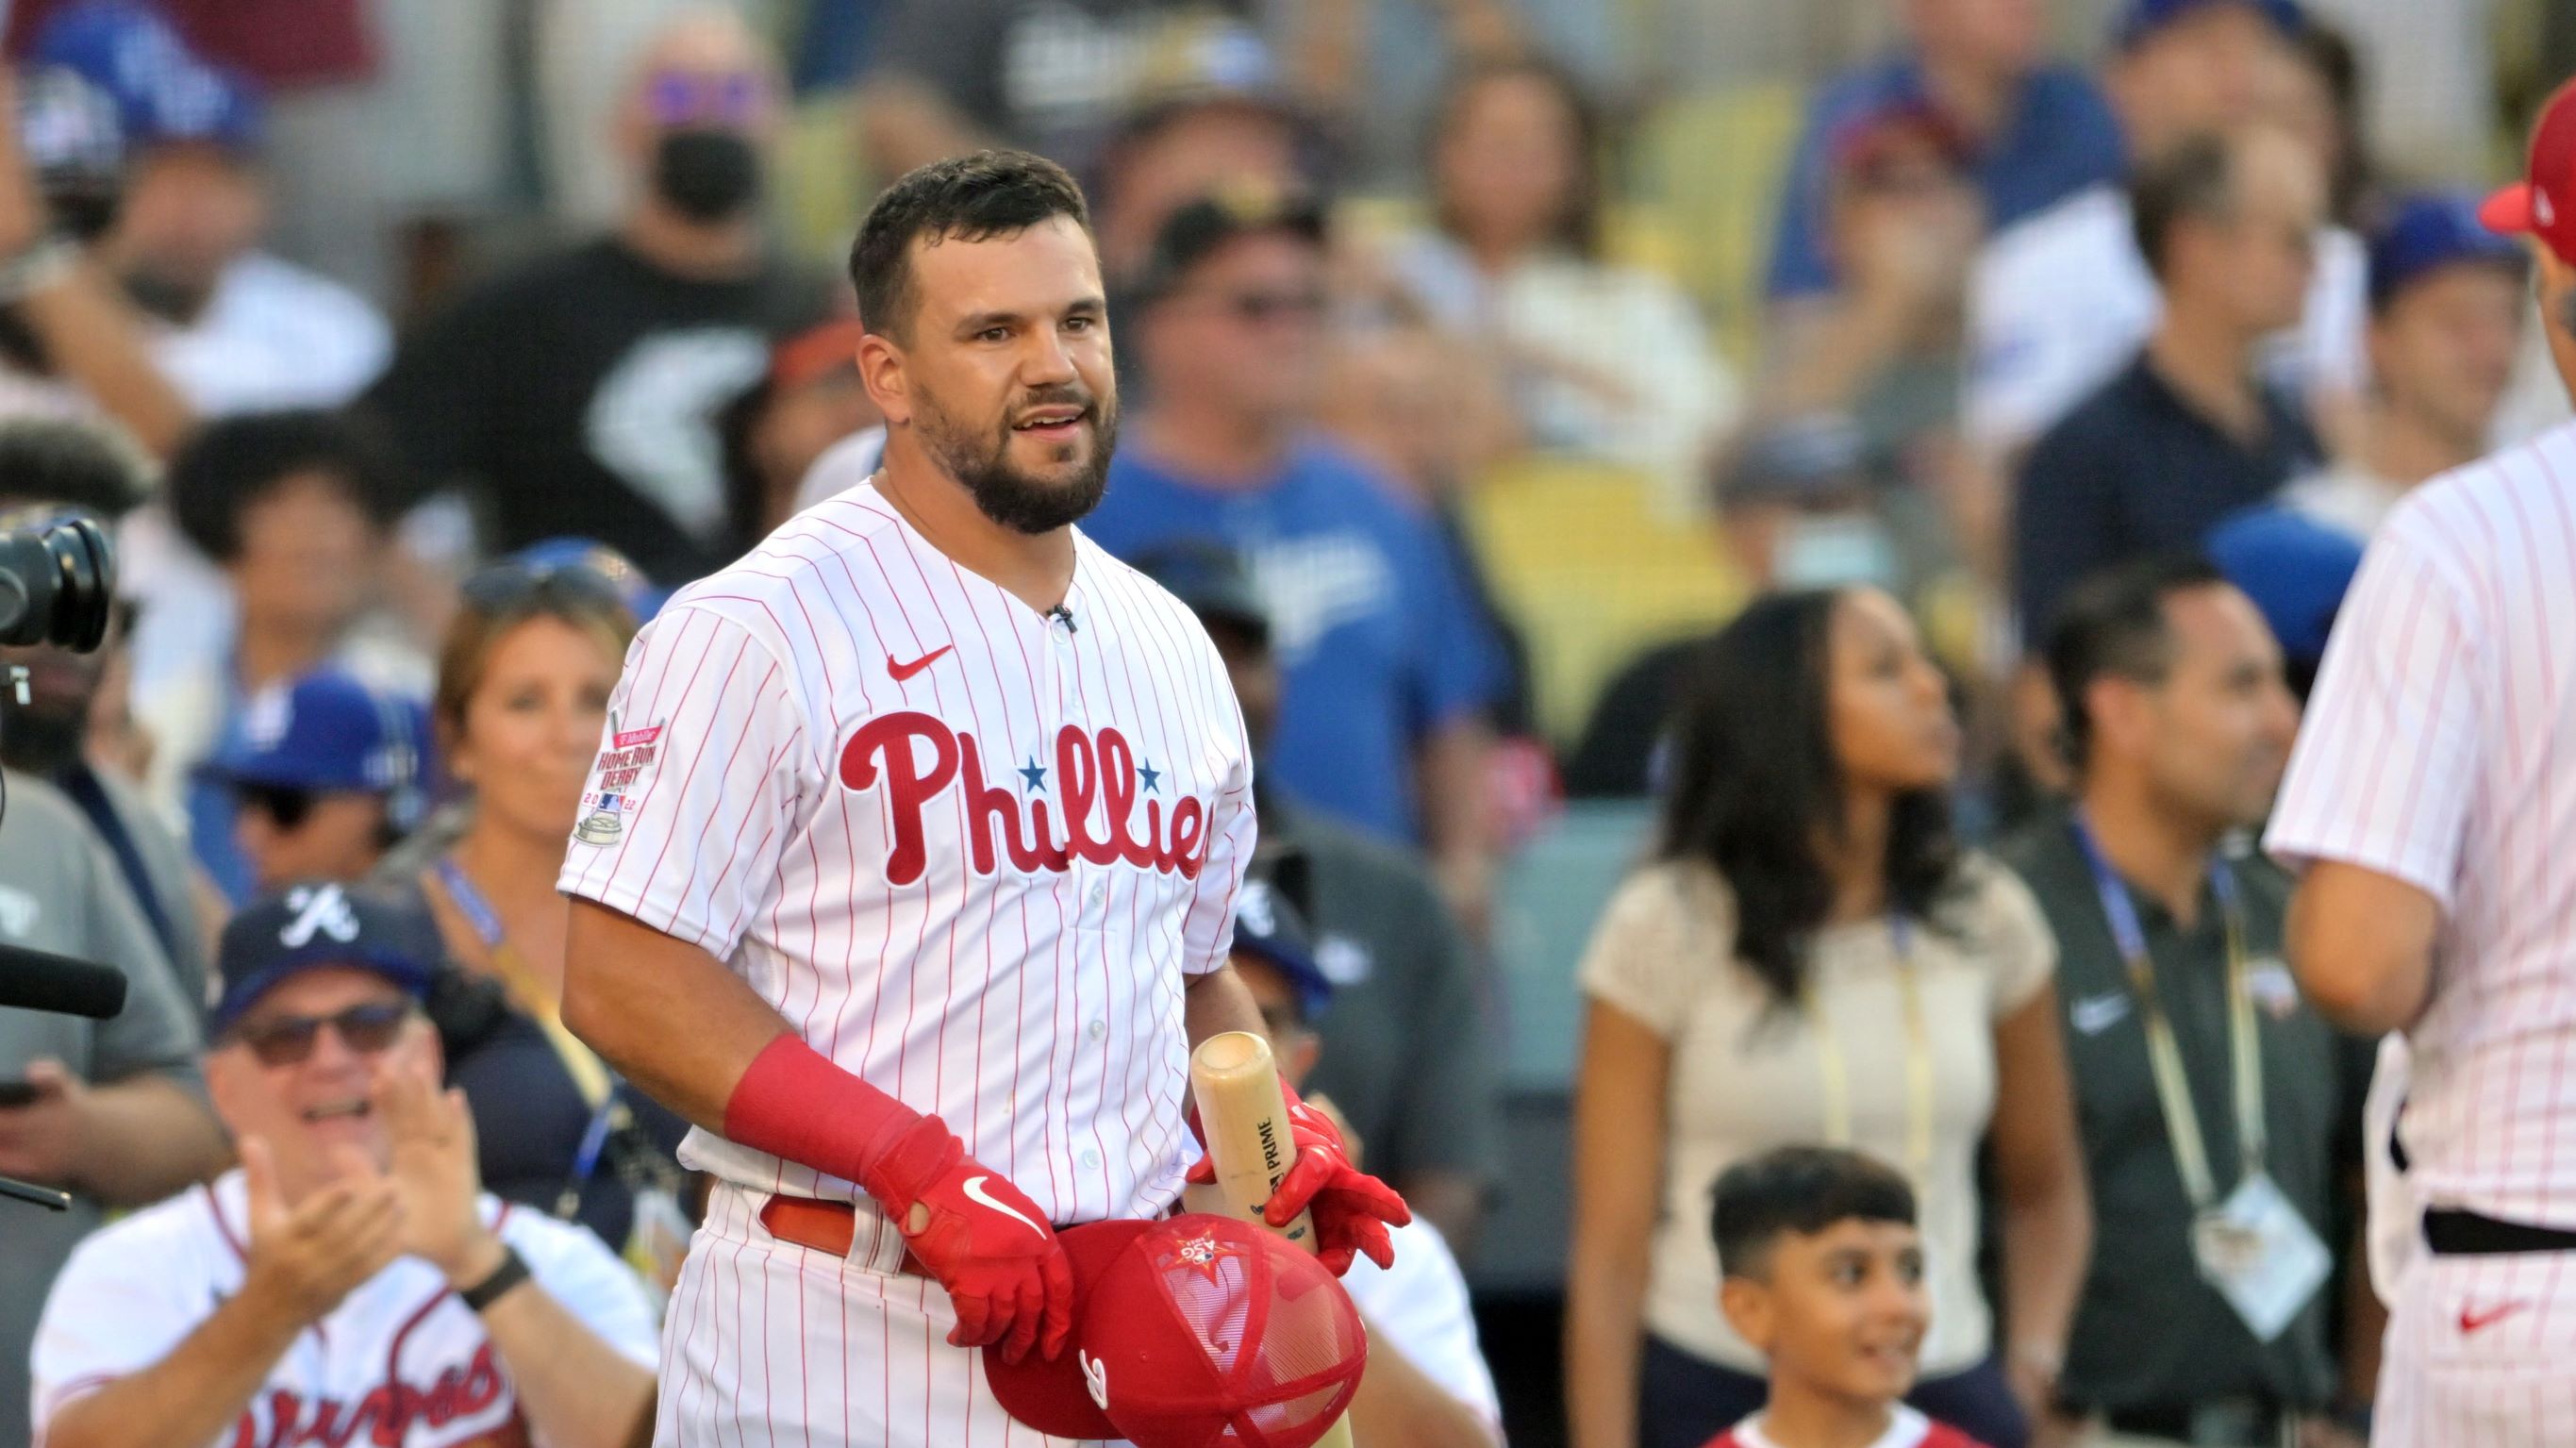 Kyle Schwarber will compete in the 2022 MLB Home Run Derby